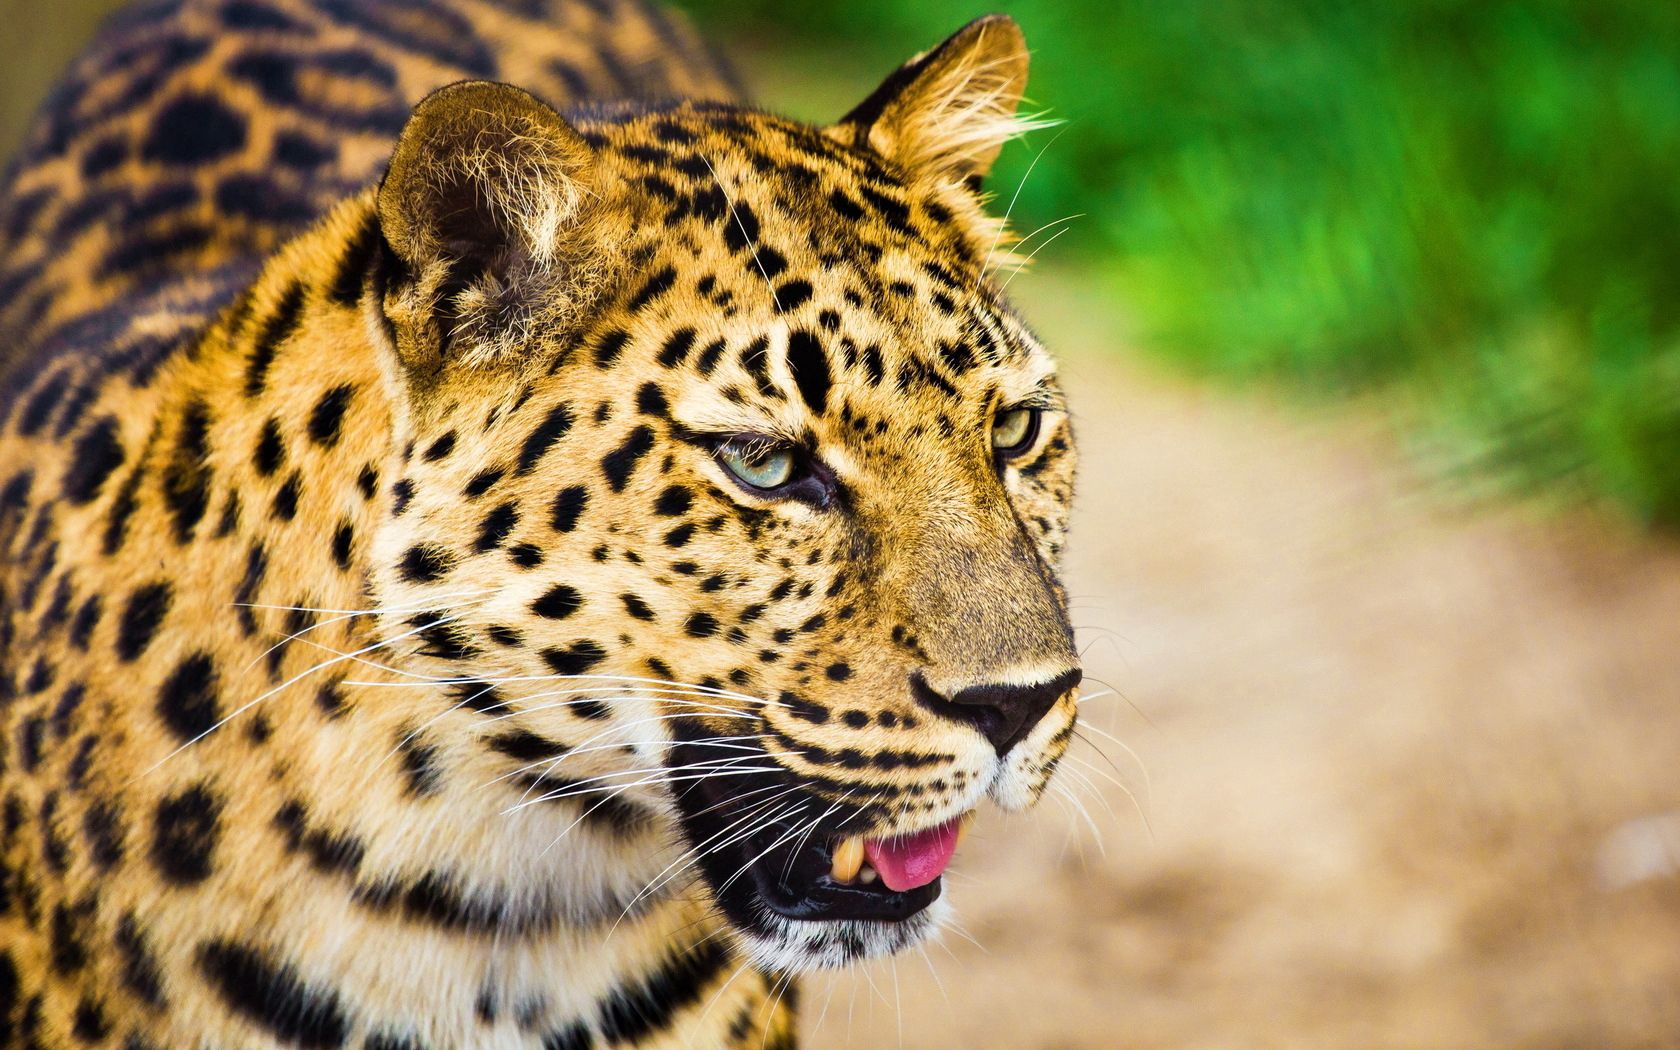 156922 Screensavers and Wallpapers Scream for phone. Download animals, background, leopard, muzzle, spotted, spotty, predator, big cat, blurred, scream, cry, greased pictures for free